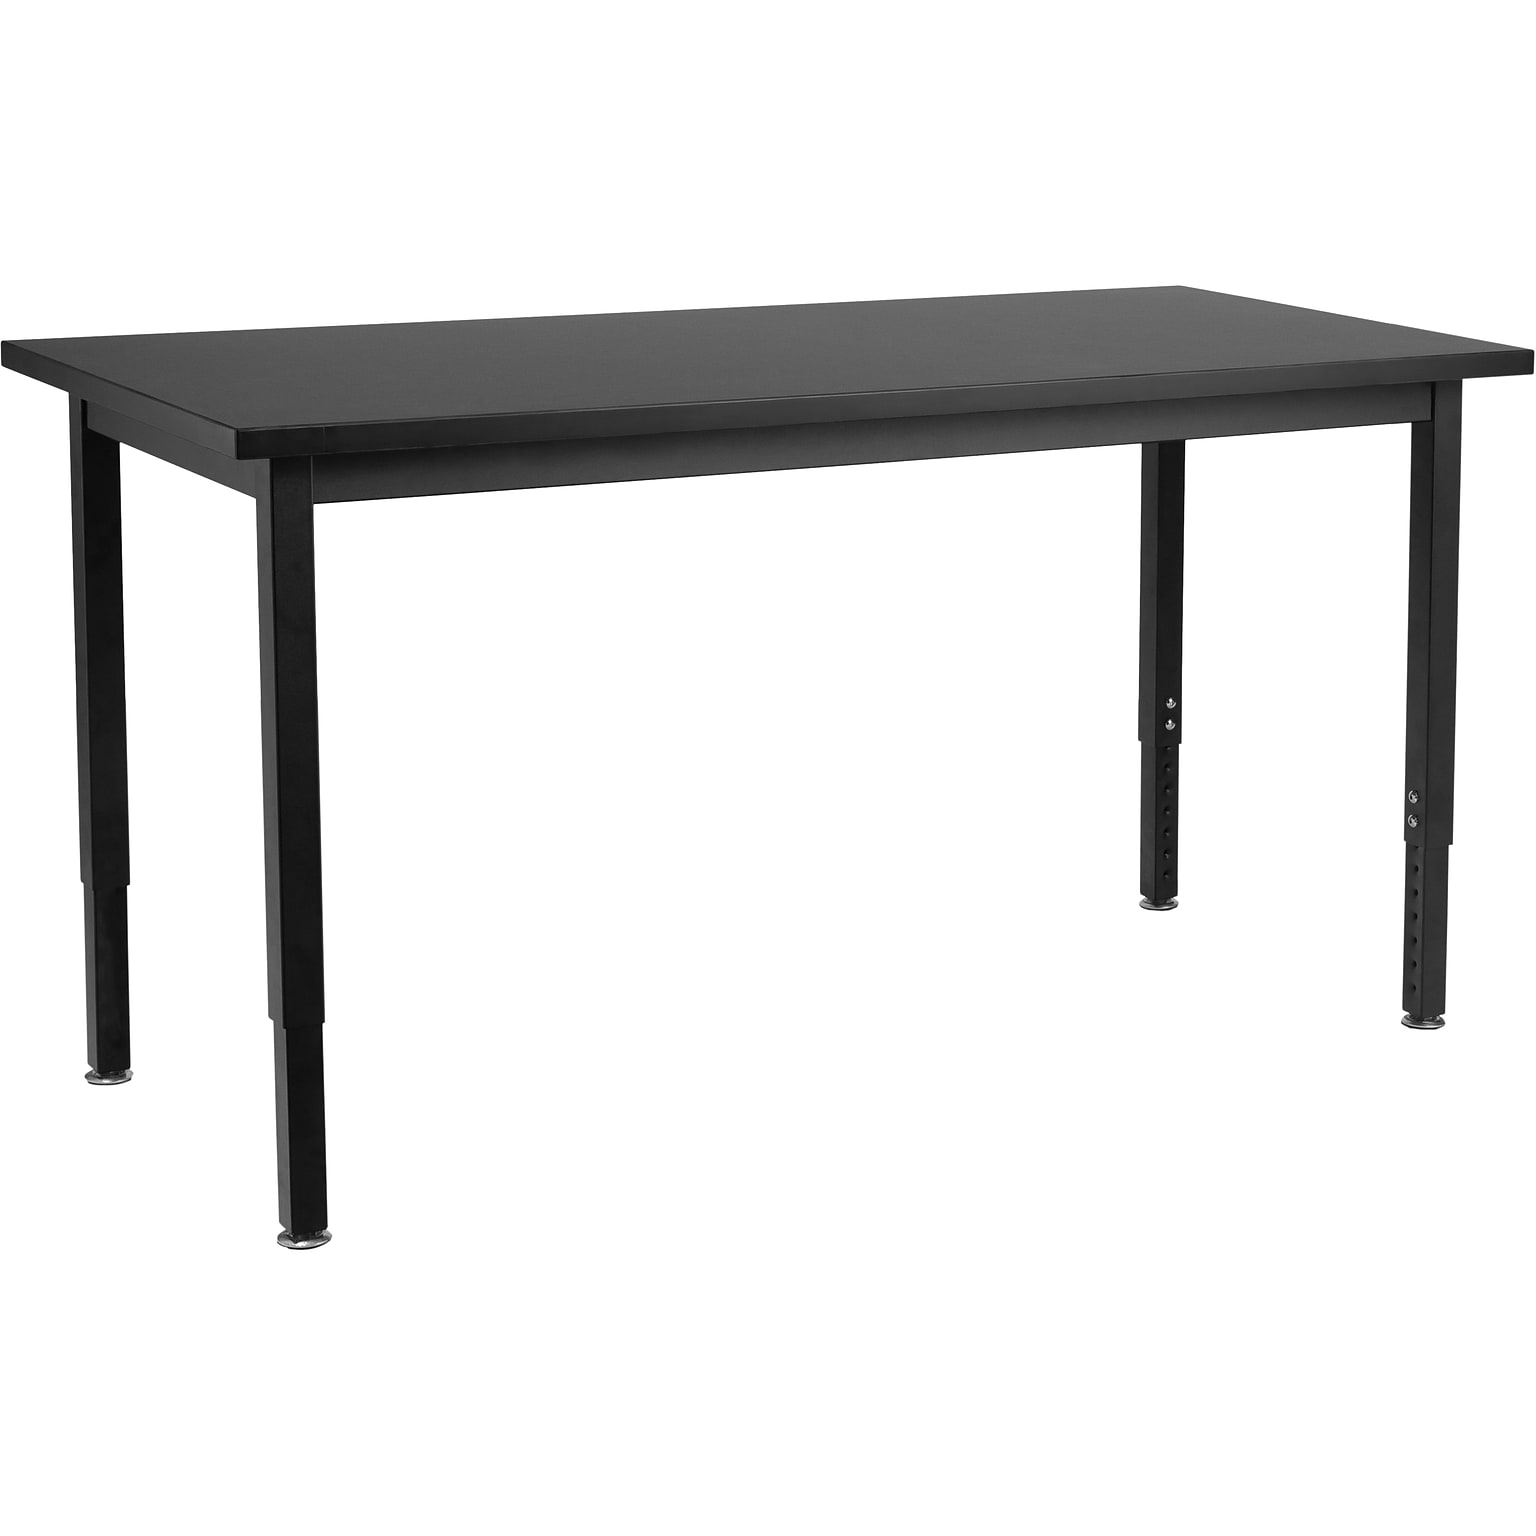 National Public Seating Steel Science Table, Chemical Resistant Series, 30 x 60, Height Adjustable, Black (SLT3-3060C)